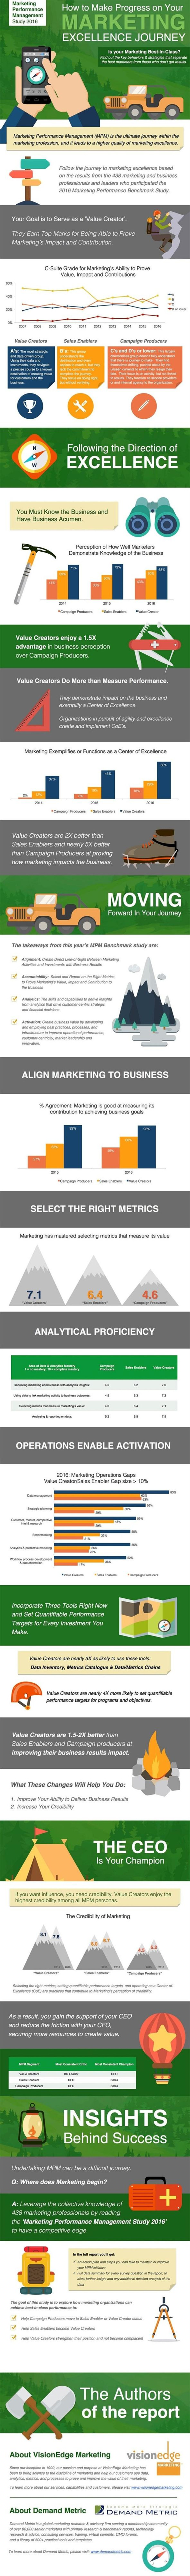 How to Make Progress on Your Marketing Excellence Journey [Infographic] - Profs | The MarTech Digest | Scoop.it